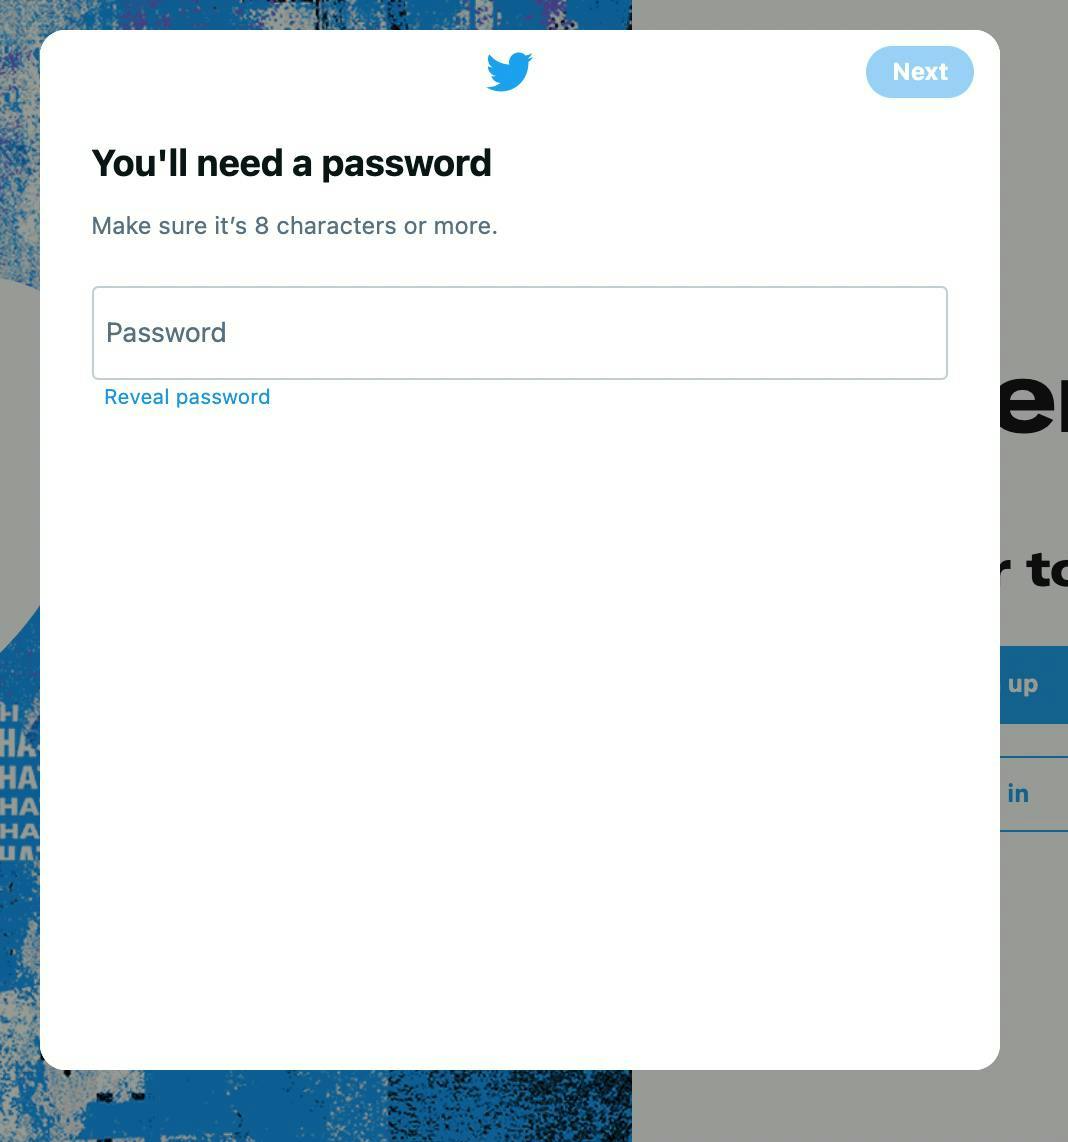 Step 5 for setting up a Twitter account, entering a password